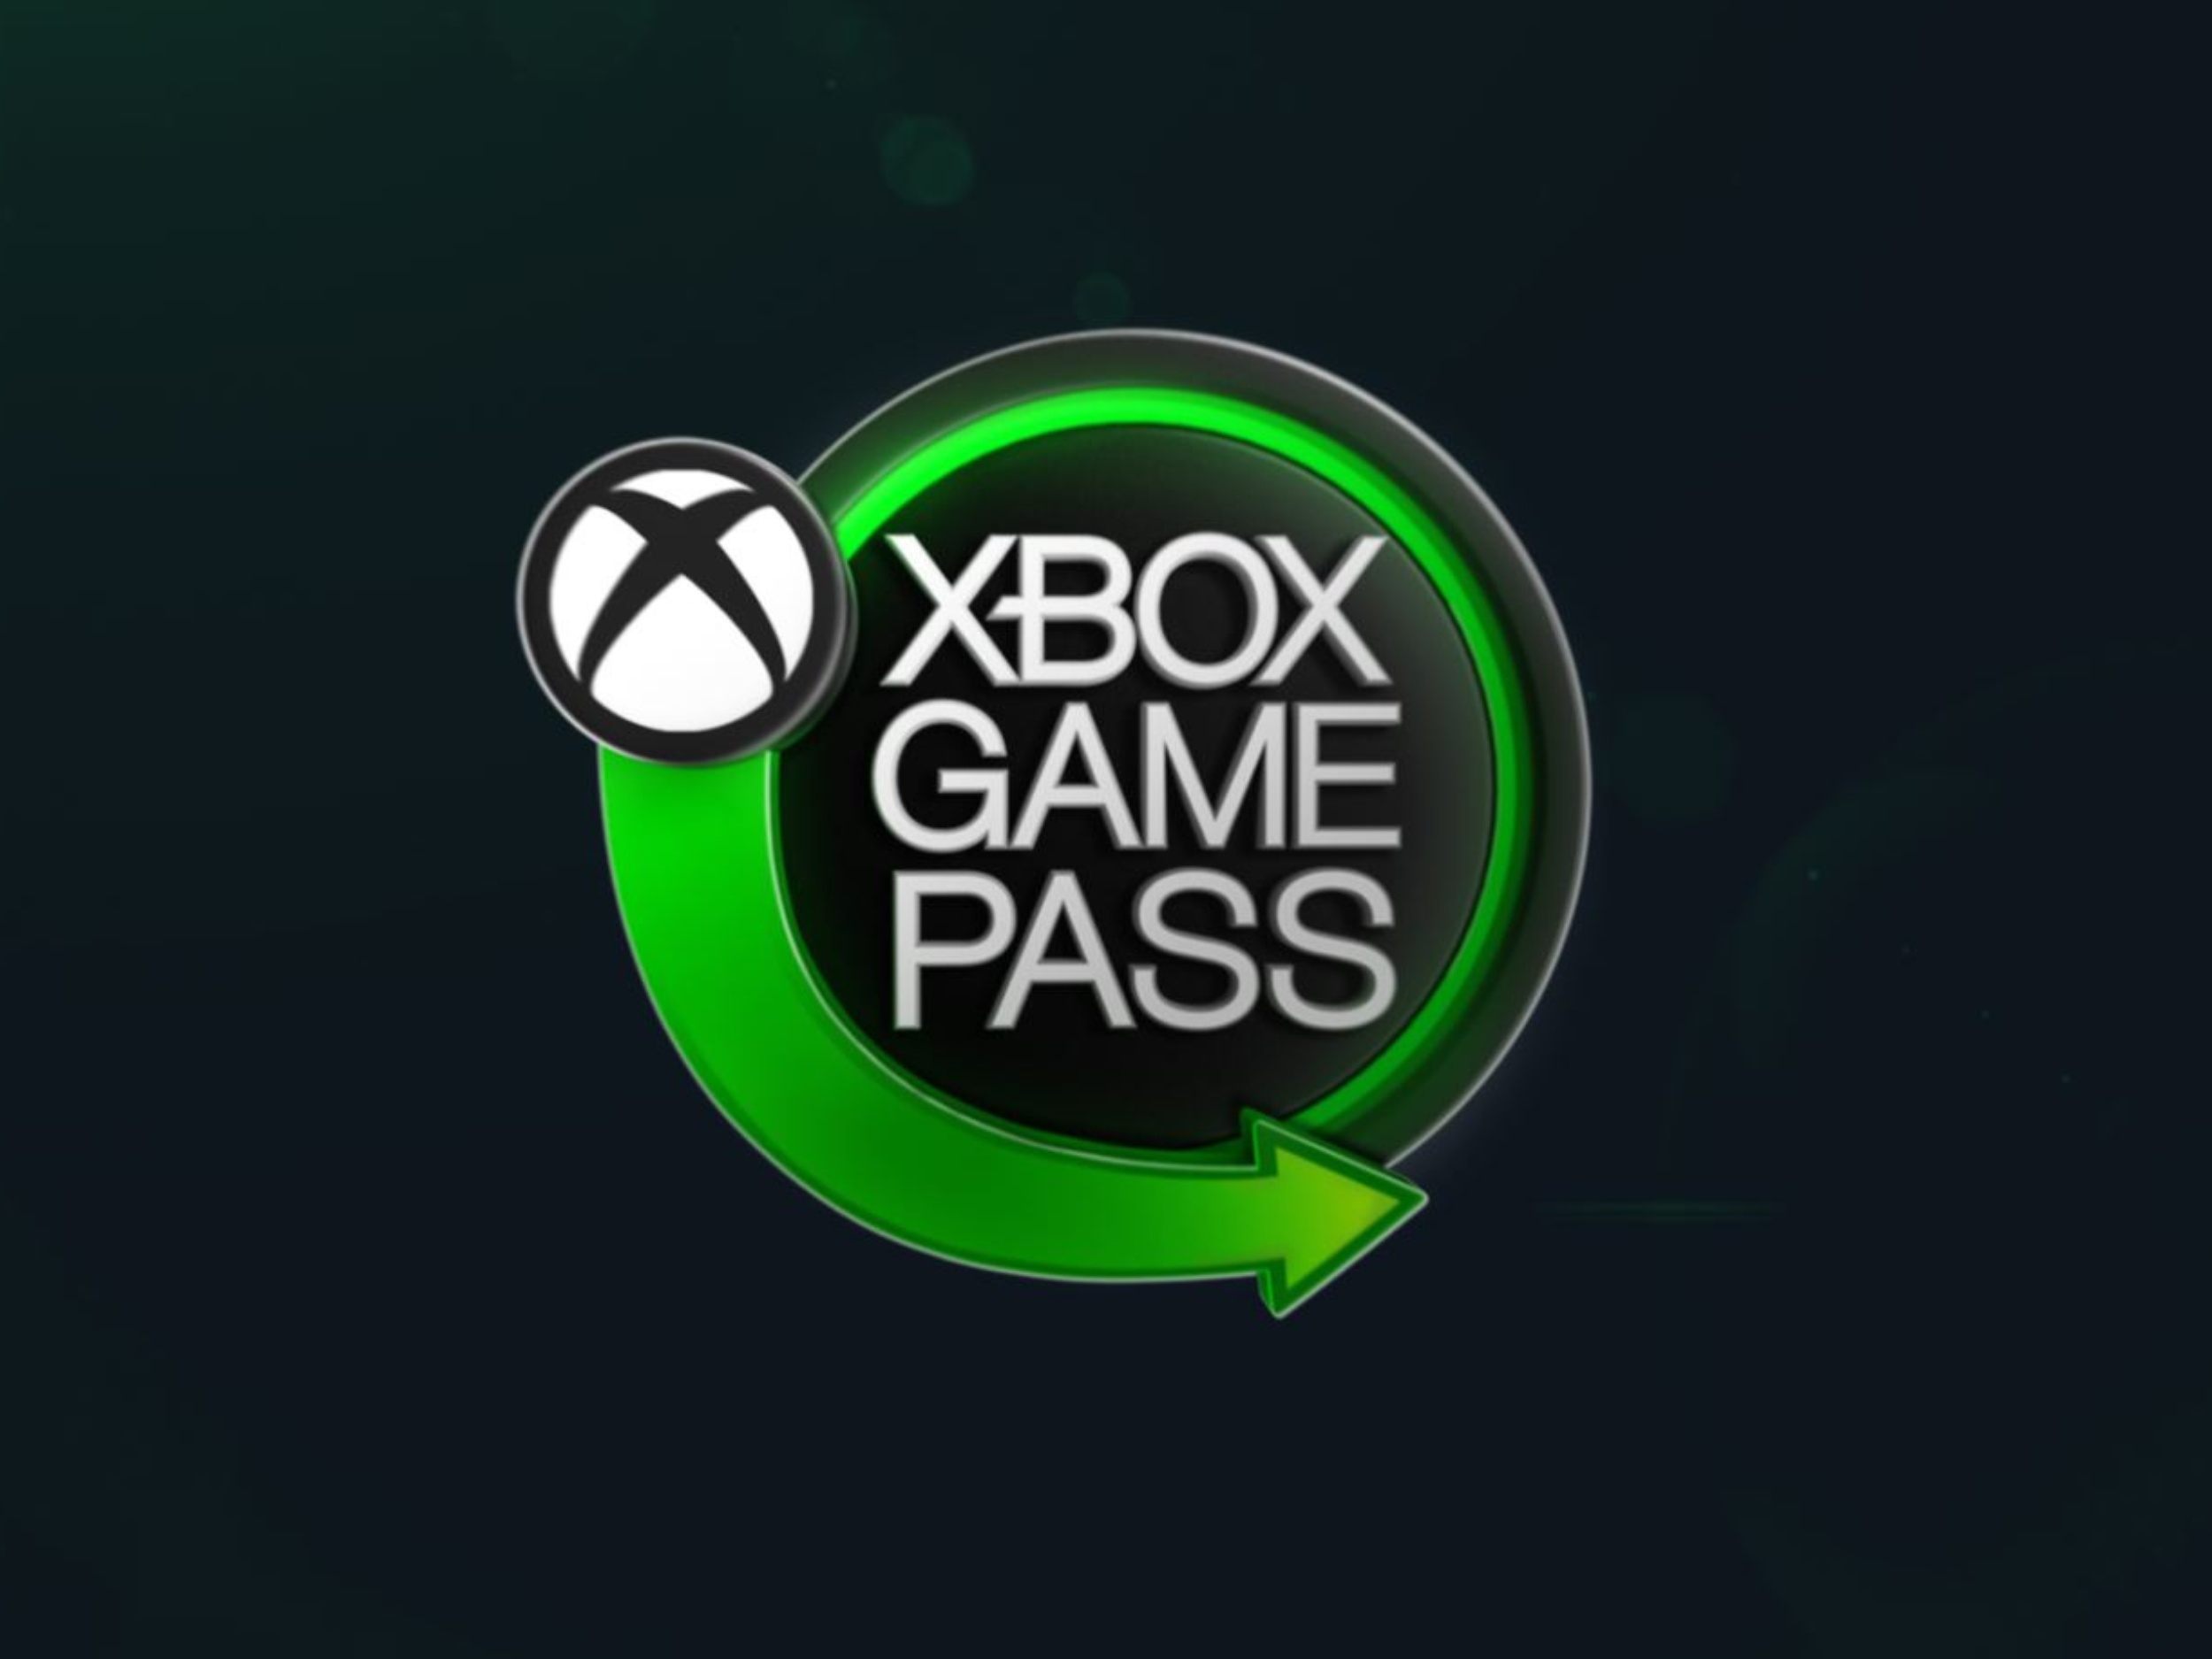 Highly anticipated RPG now available on Xbox Game Pass at launch